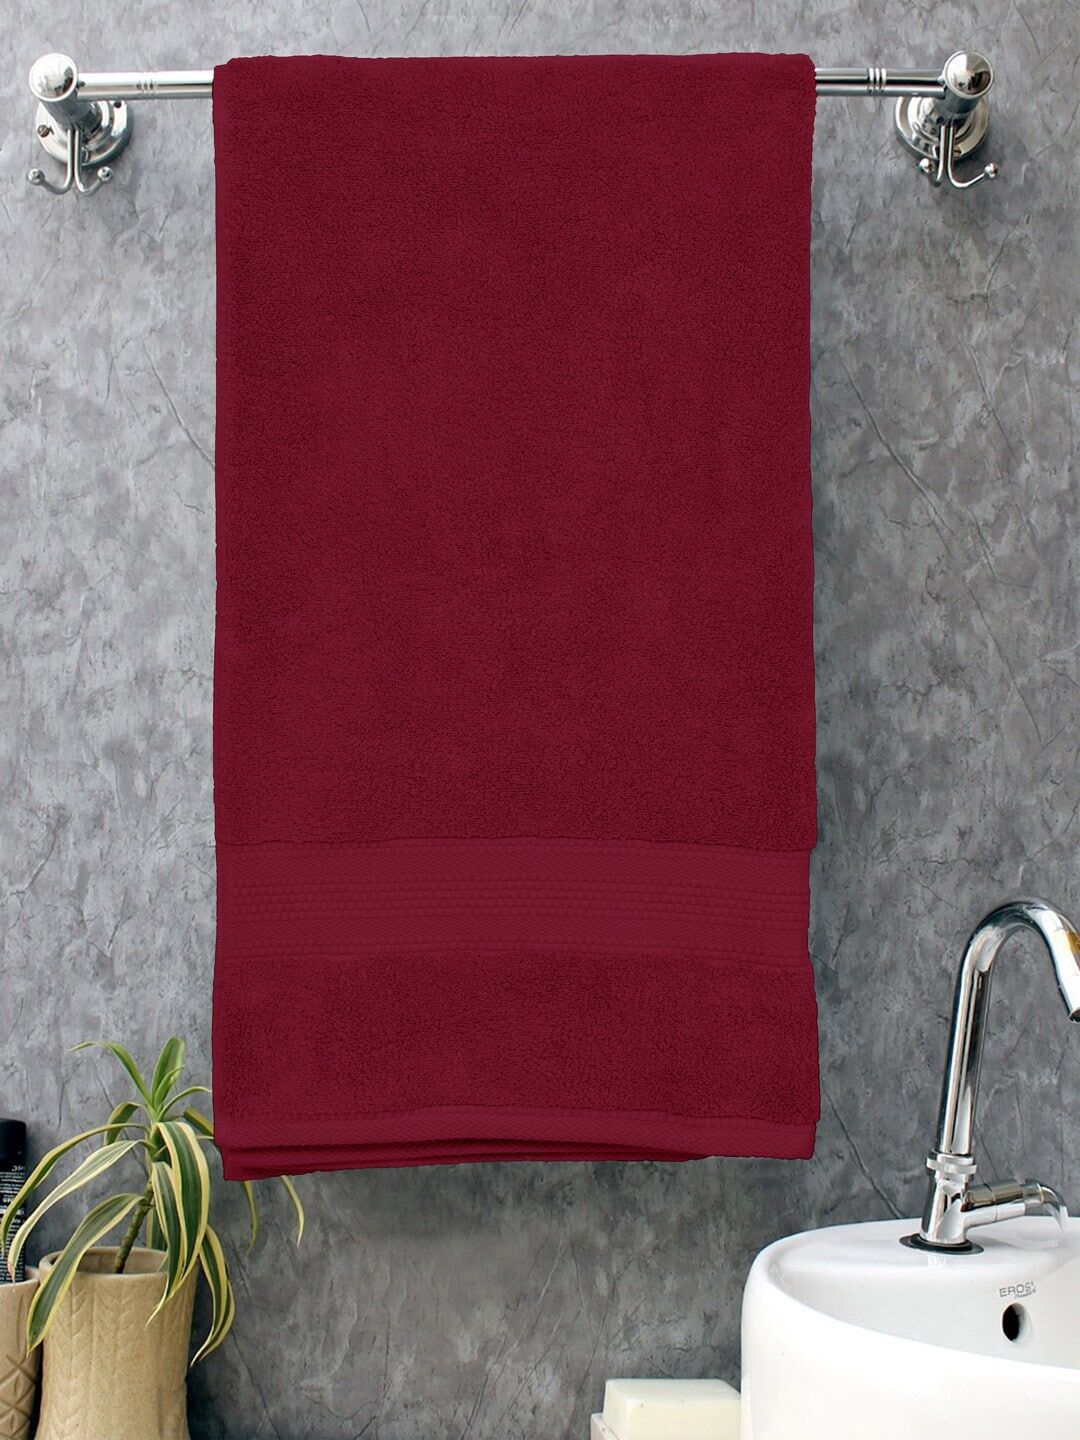 BOMBAY DYEING Burgundy-Coloured Solid 650 GSM Cotton Bath Towel Price in India